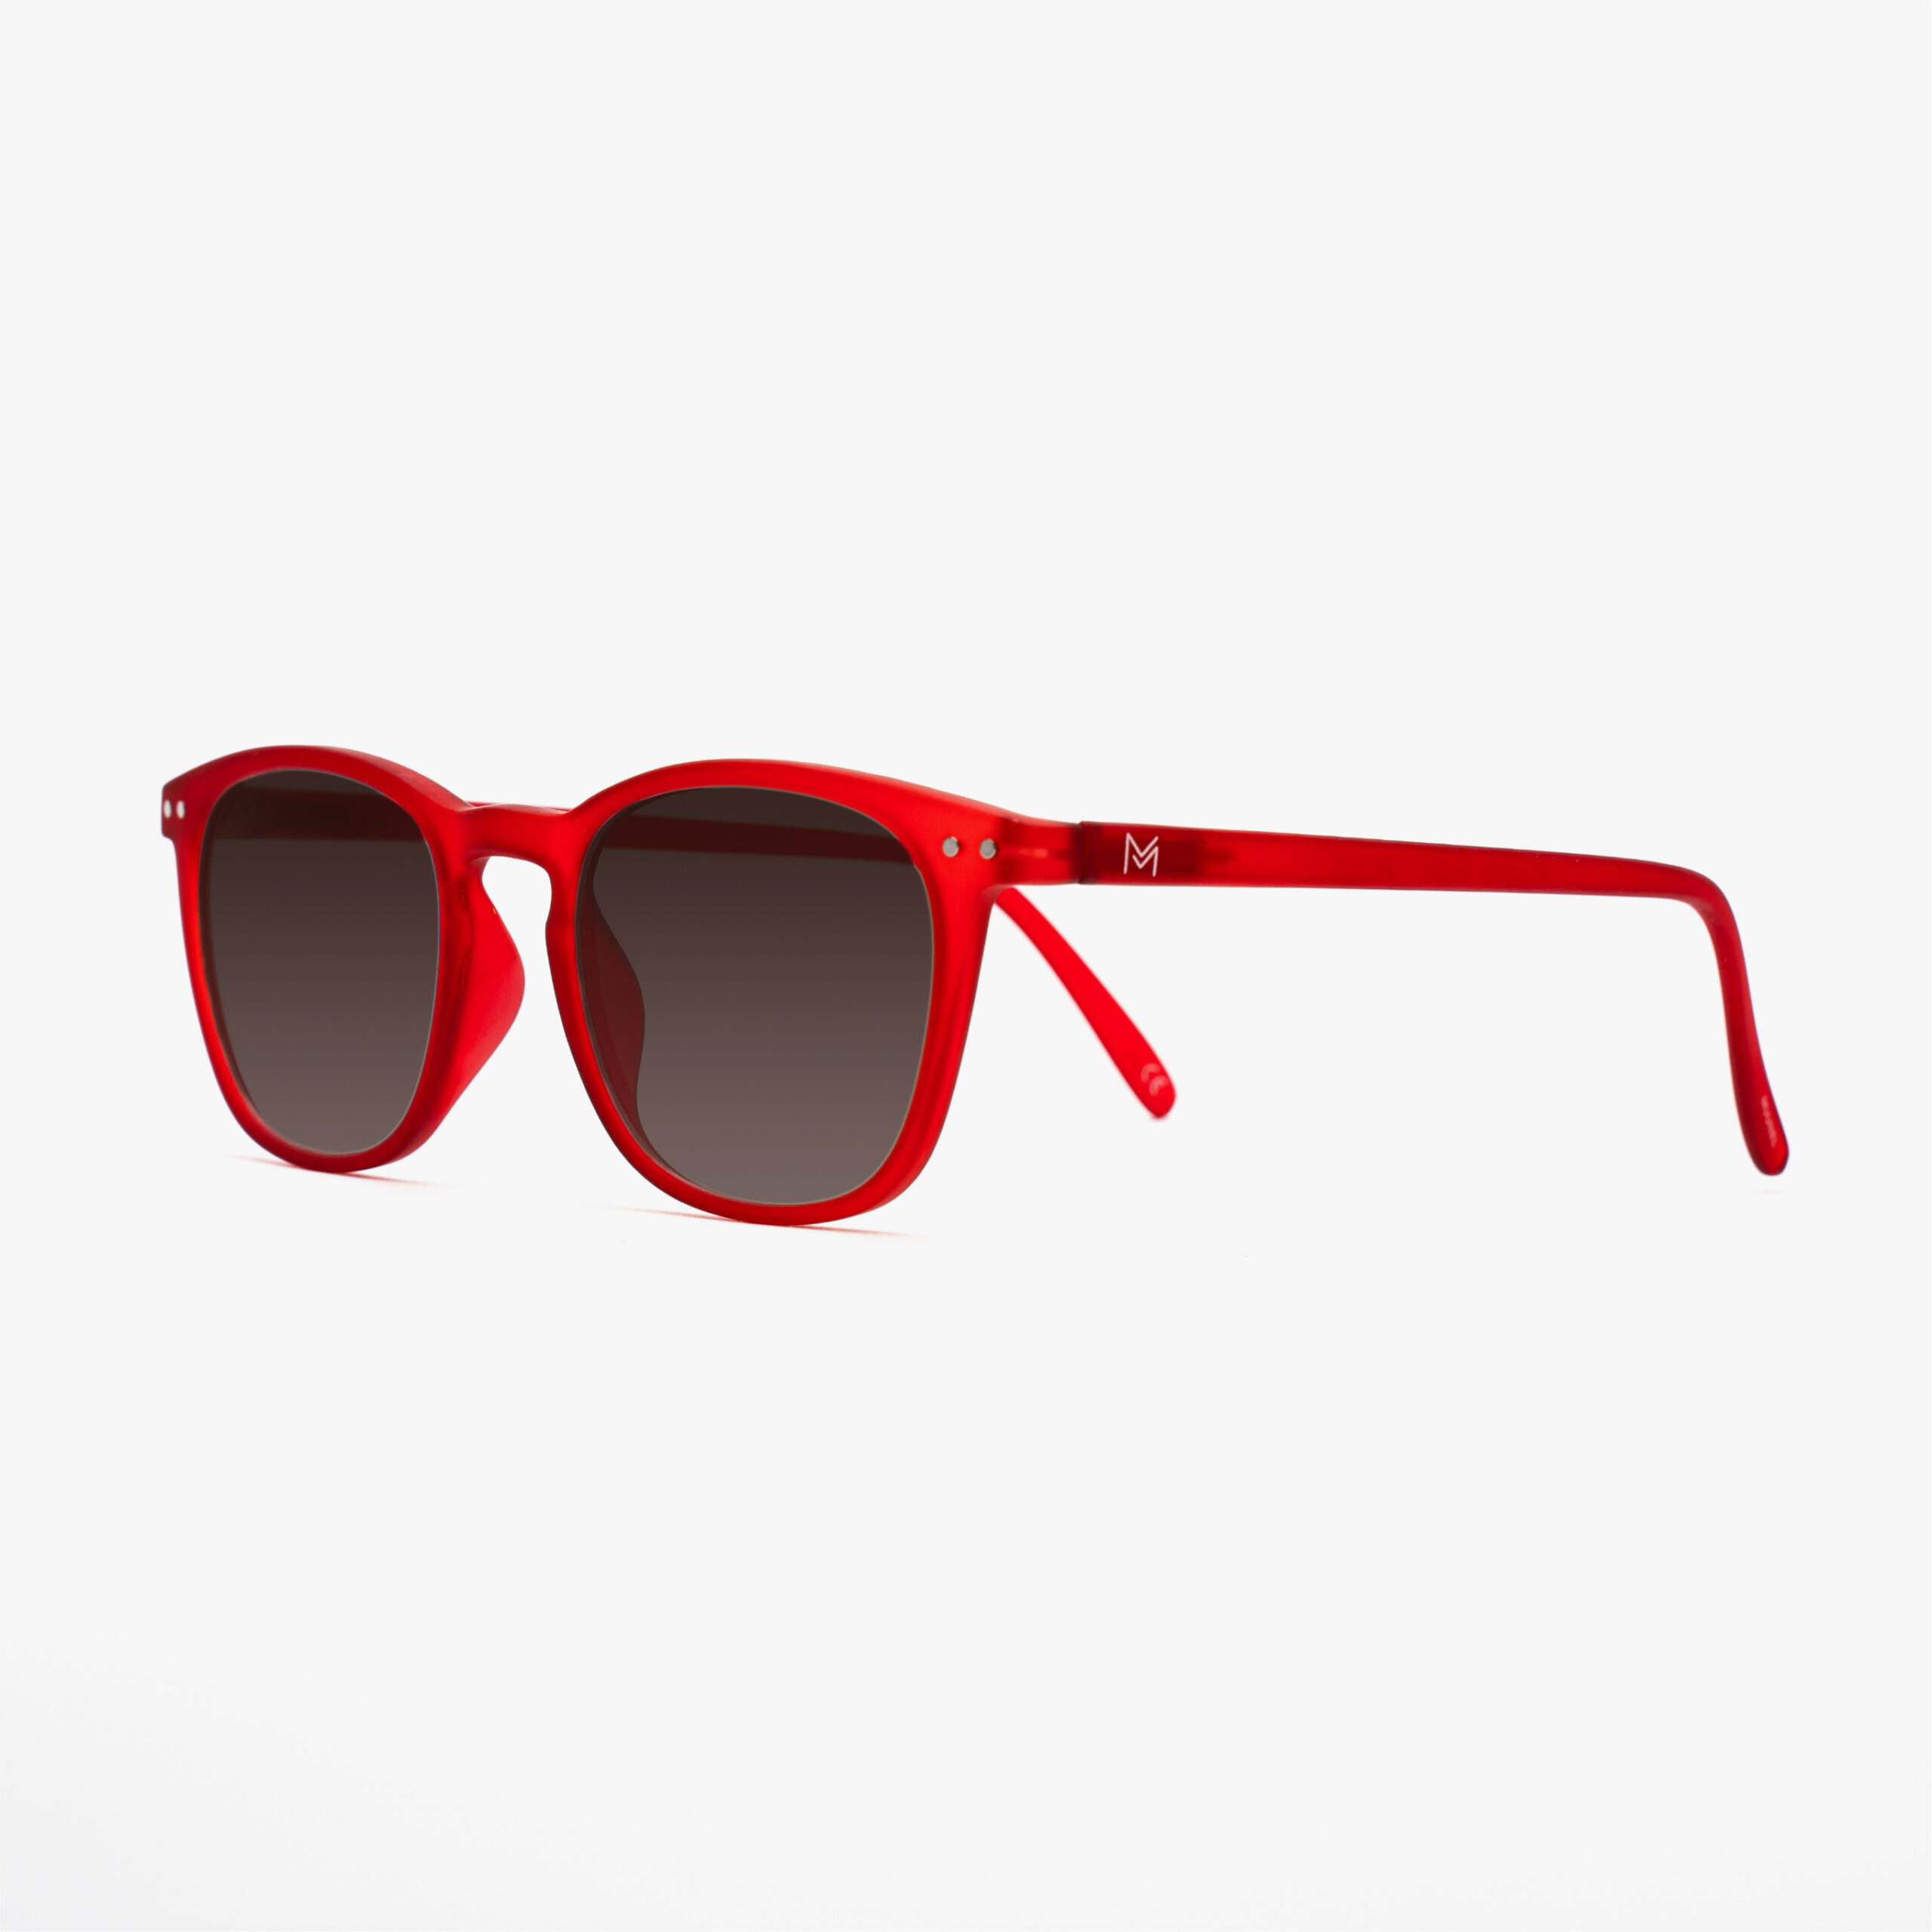 transition-photochromic-glasses-brown-lenses-william-red-profile